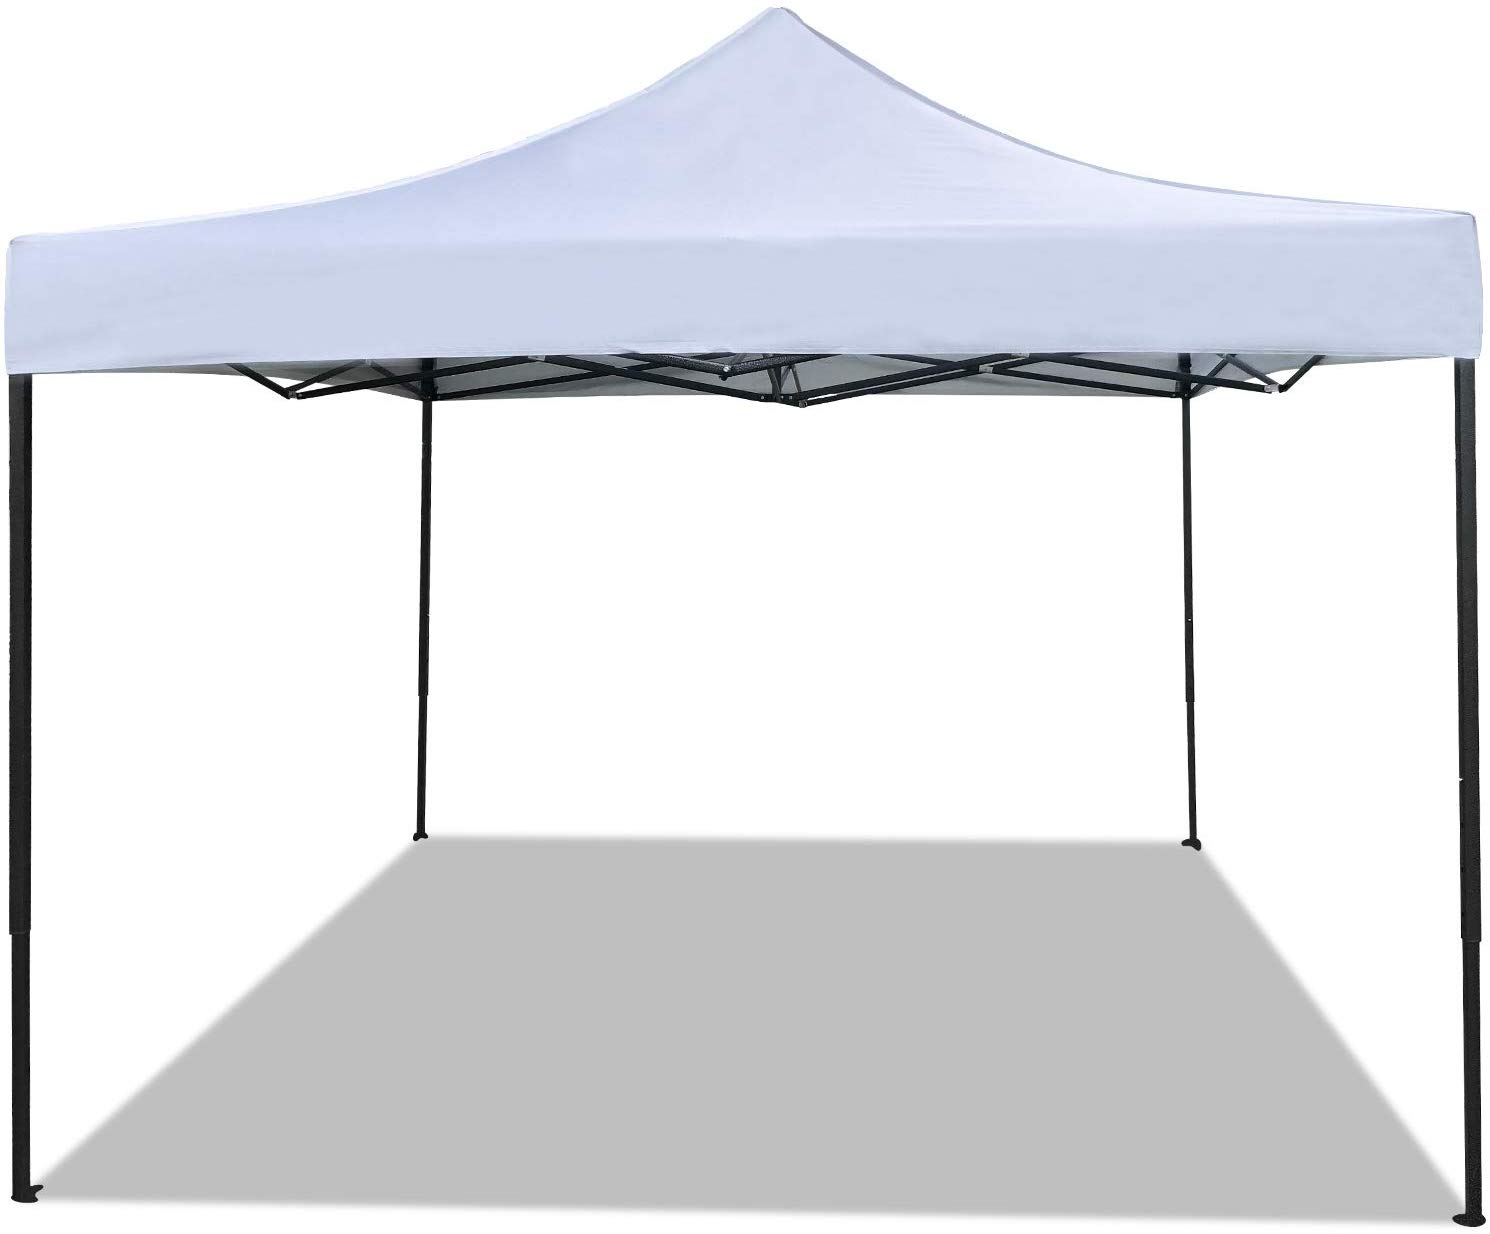 FDW Pop Up Canopy 10x10 Pop Up Canopy Tent Party Tent Ez Up Canopy Sun Shade Wedding Instant Folding Protable Better Air Circulation Outdoor Gazebo with Backpack Bag 